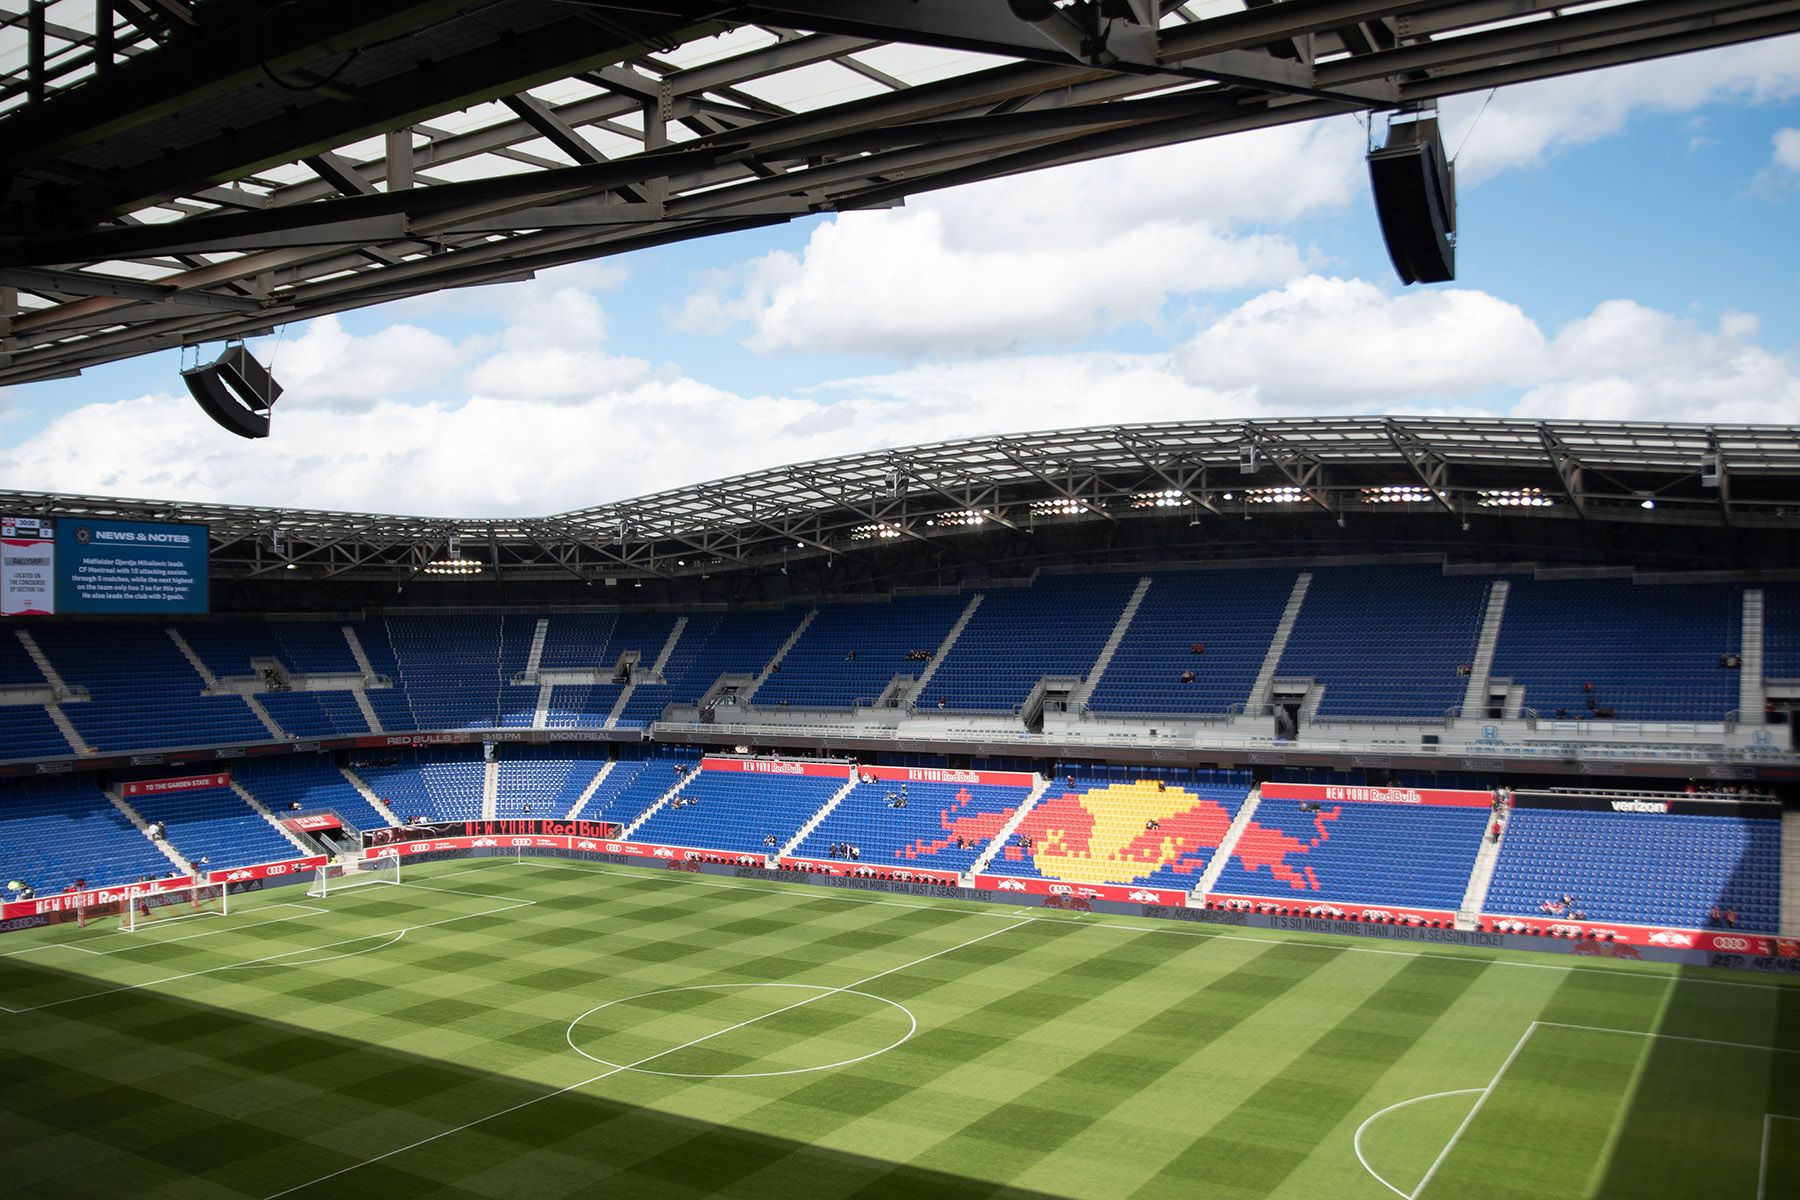 L-Acoustics A Series Loudspeakers Supply High-Energy Impact at Red Bull Arena featured image